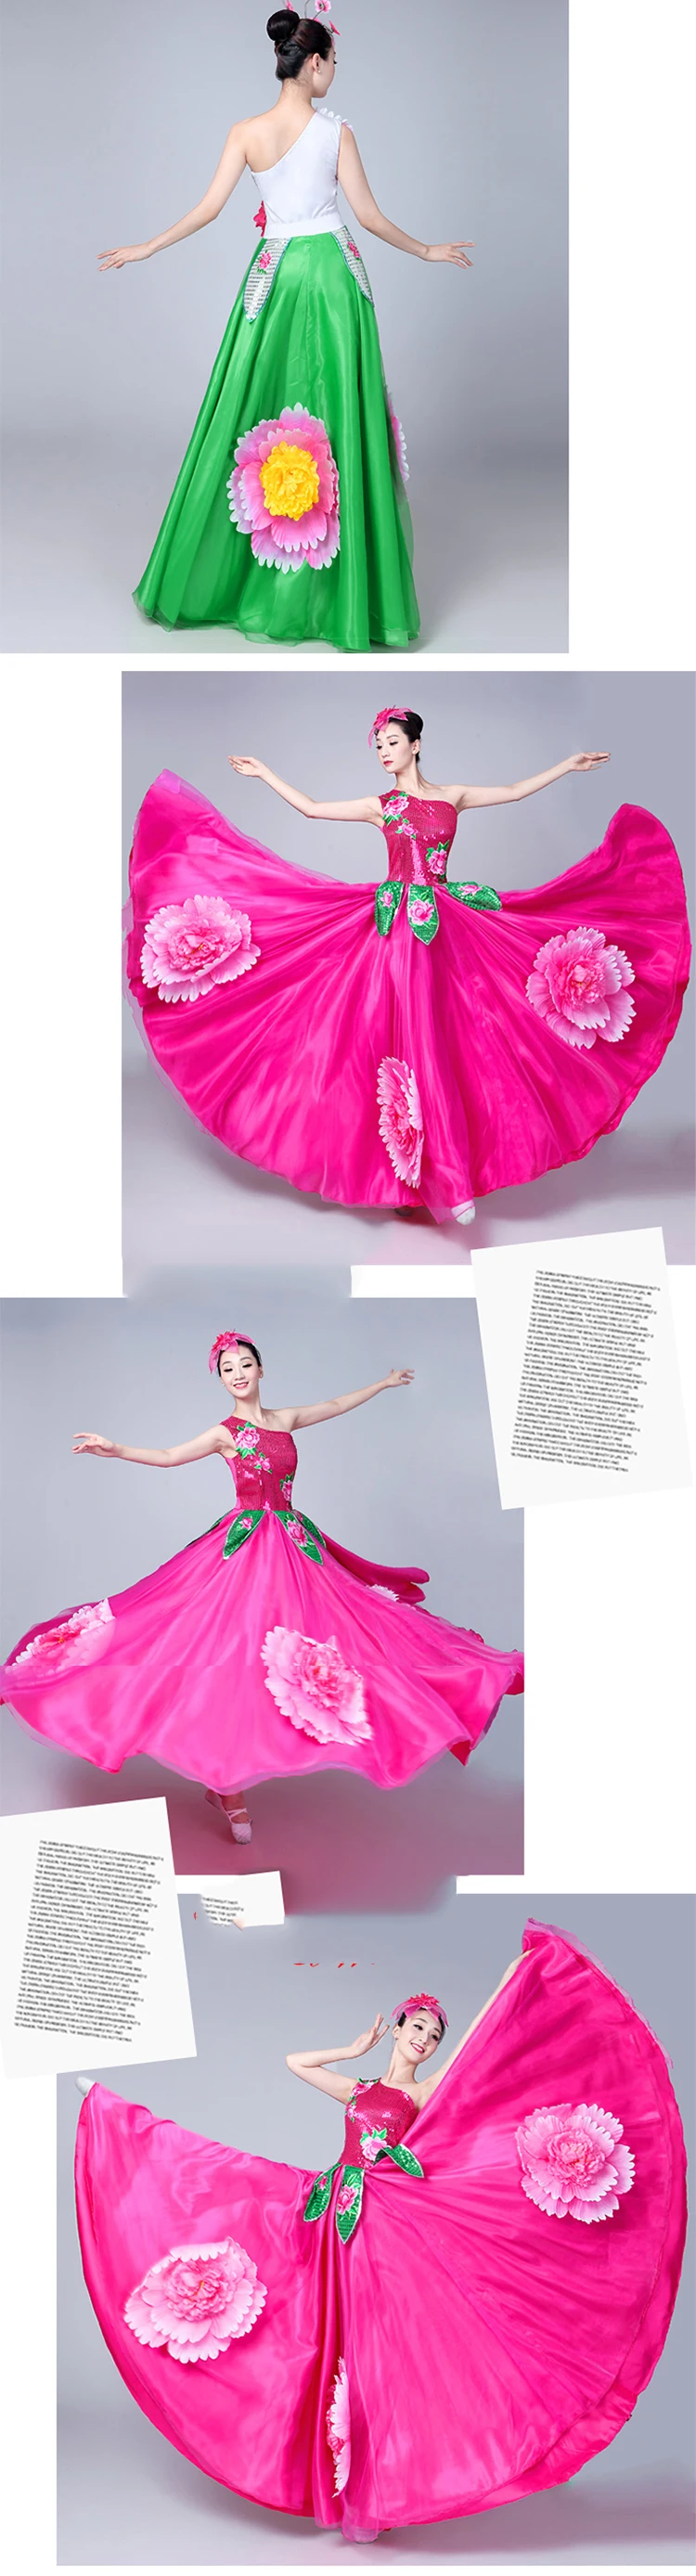 Flamenco Dress Woman Ballroom Dresses Spain Dancer Costume Women Spanish Costumes Gypsy Outfit Stage Performance Wear DN3591